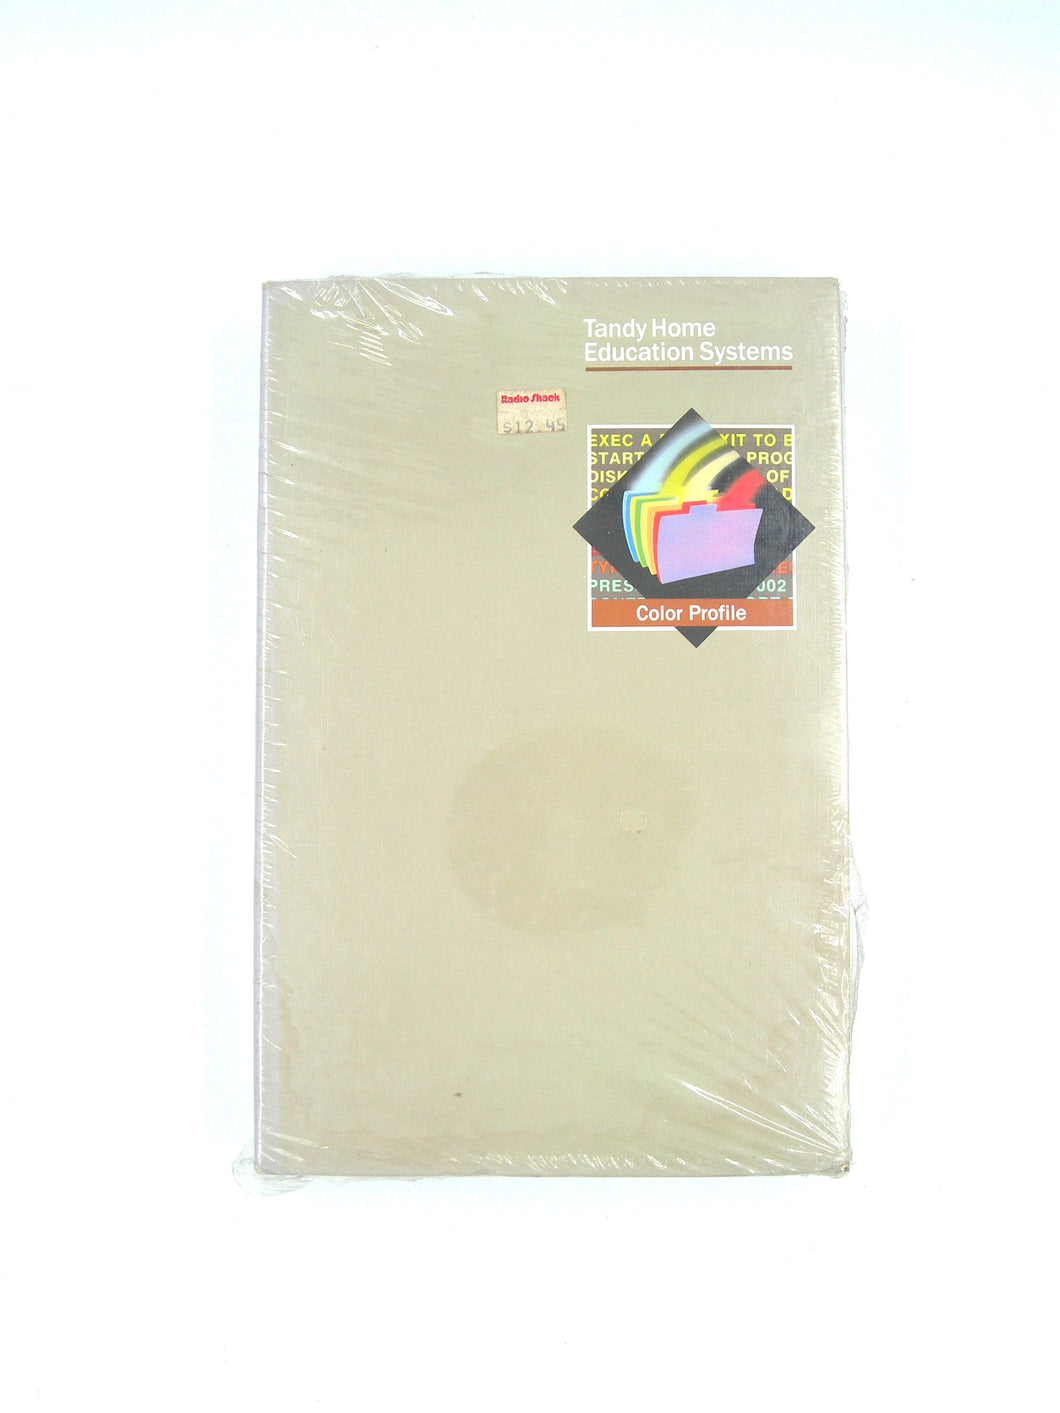 Tandy Color Computer 2,3 disk - Color Profile (sealed)